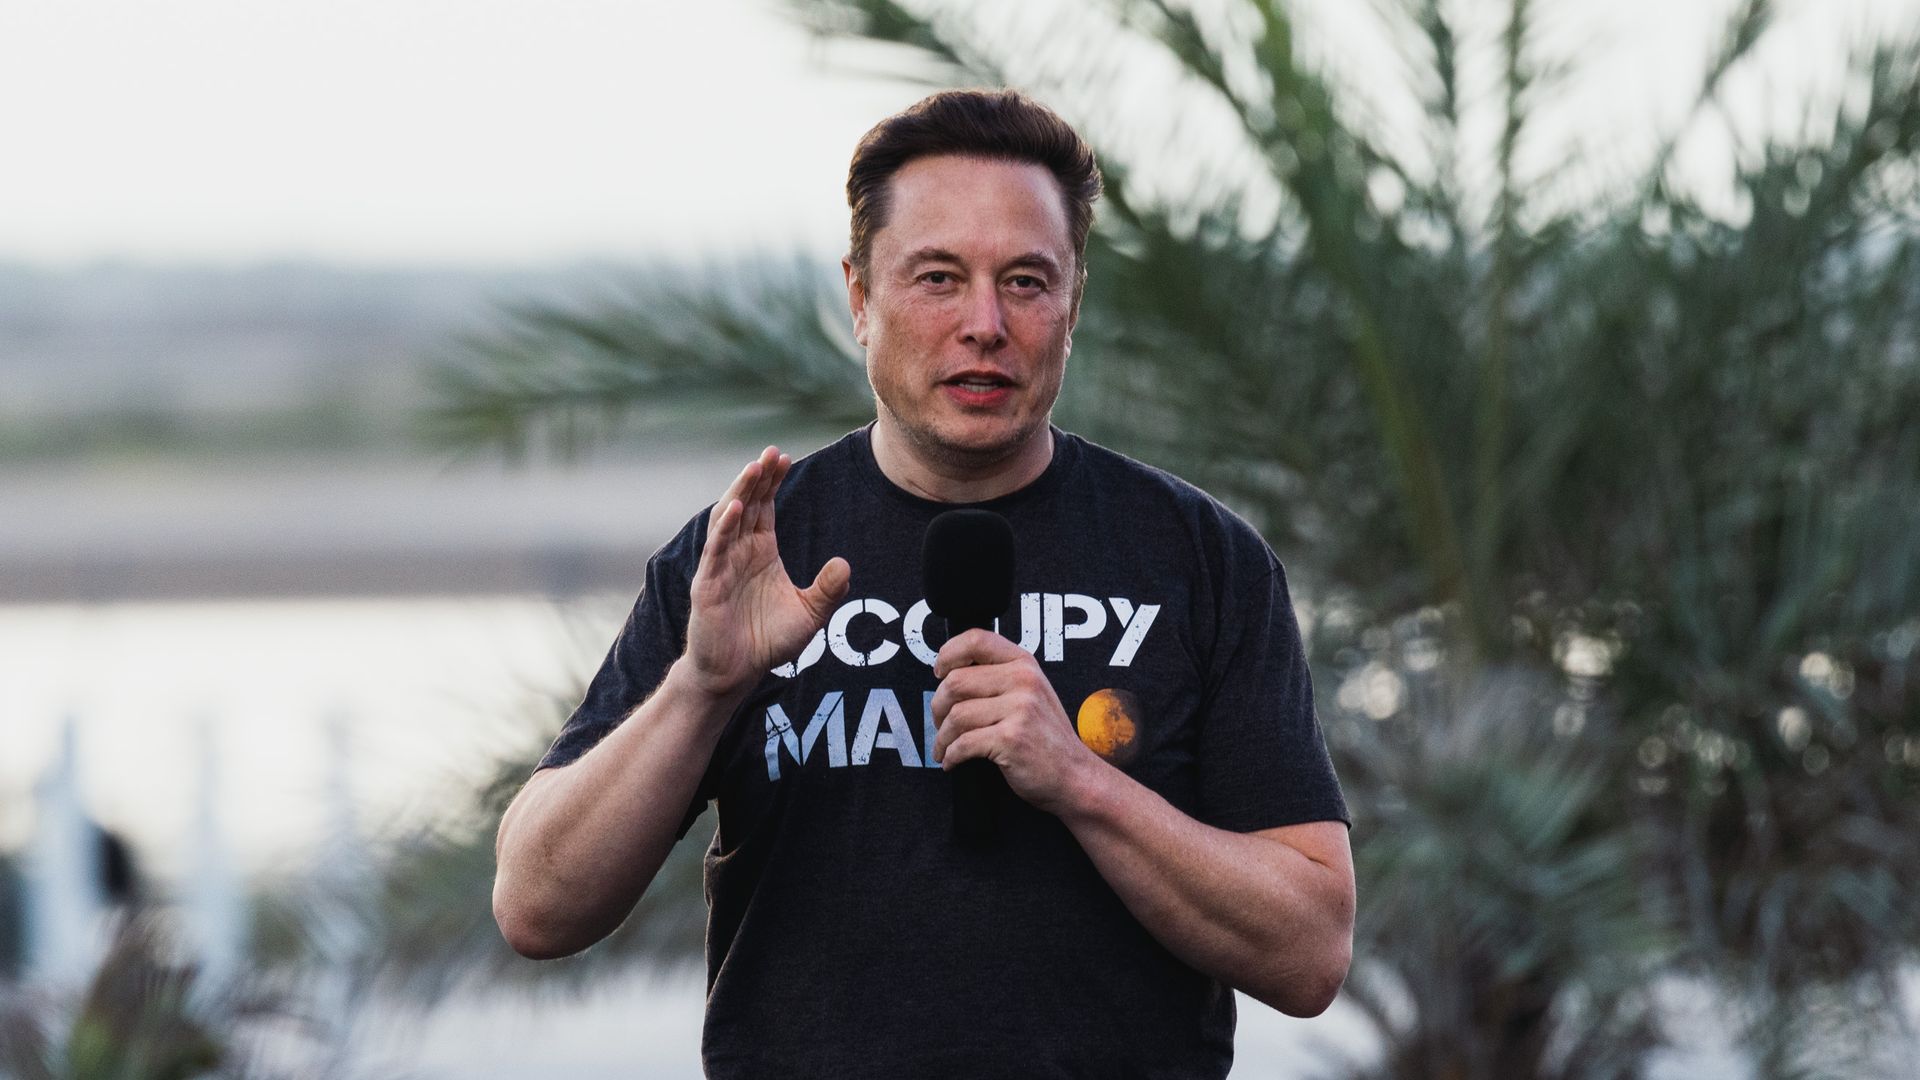 Elon Musk, co-founder and chief executive officer of Space Exploration Technologies Corp. (SpaceX) and Tesla Inc., during a news conference in August in Texas.